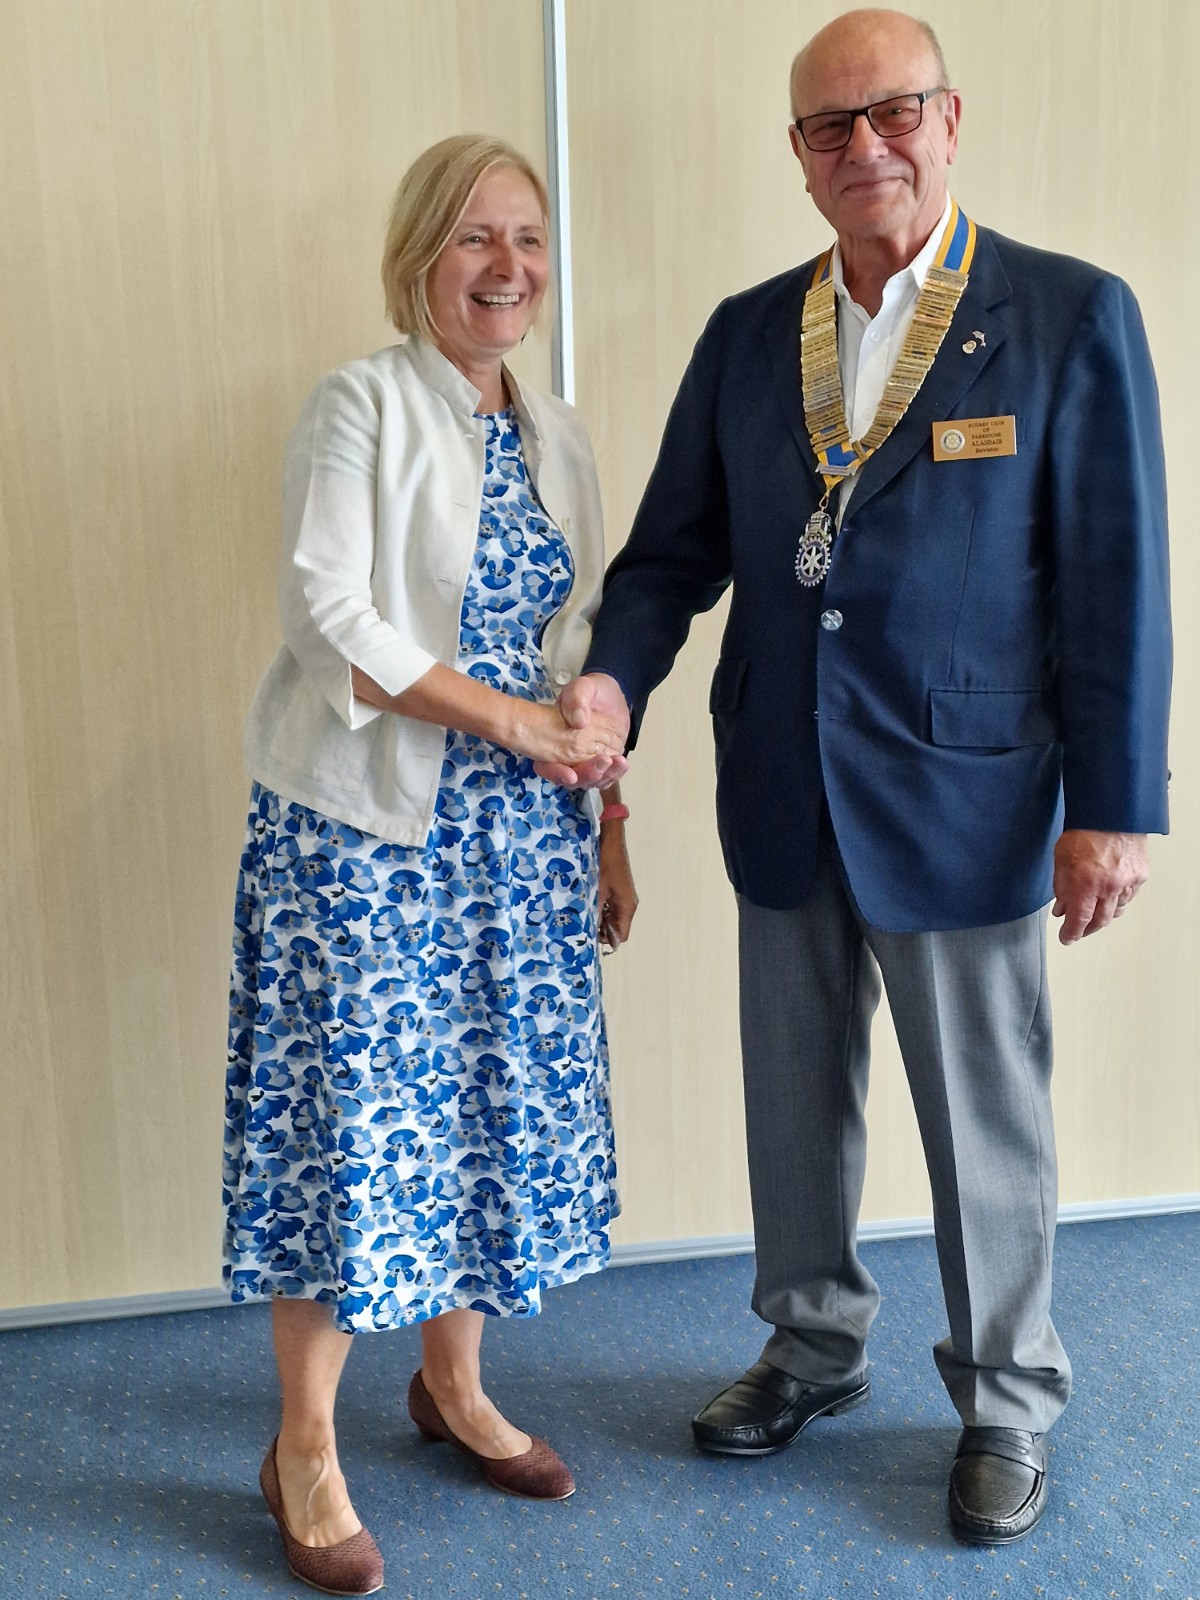 Rotary Parkstone Past President Liz handing over to our New President Alasdair